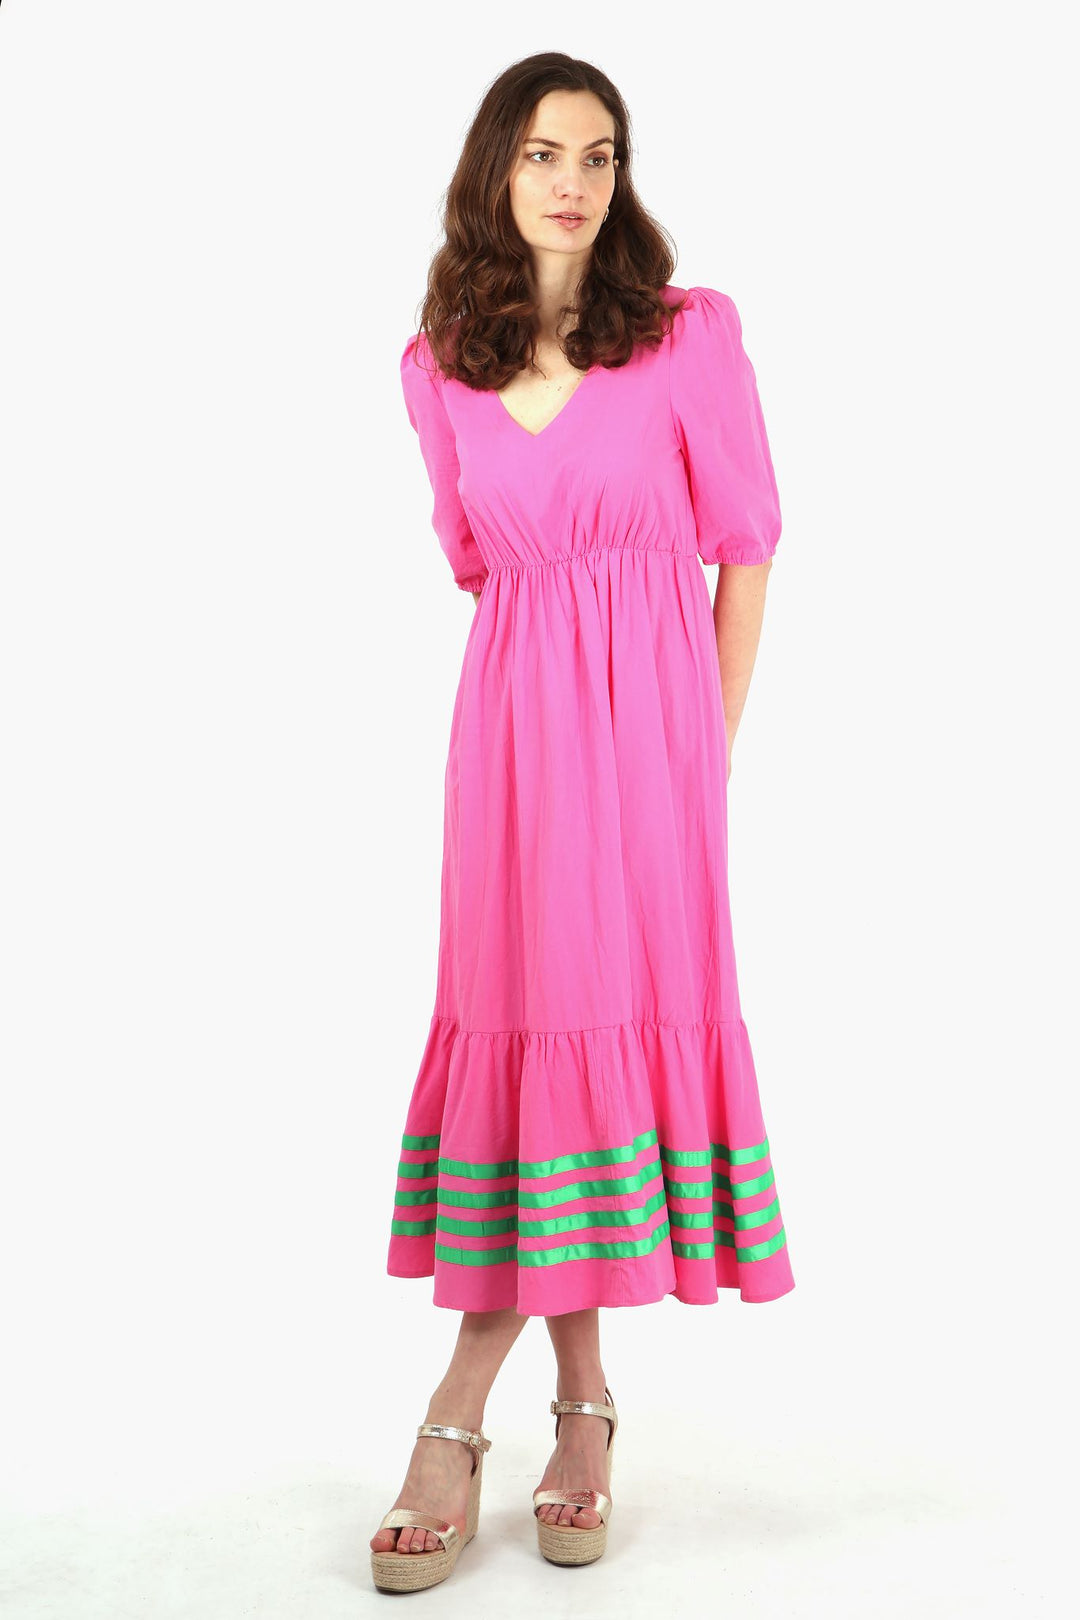 model wearing a pink midaxi length dress with four horizontal green ribbon stripes on the bottom tier of the dress, dress has a v neck and elbow length short sleeves